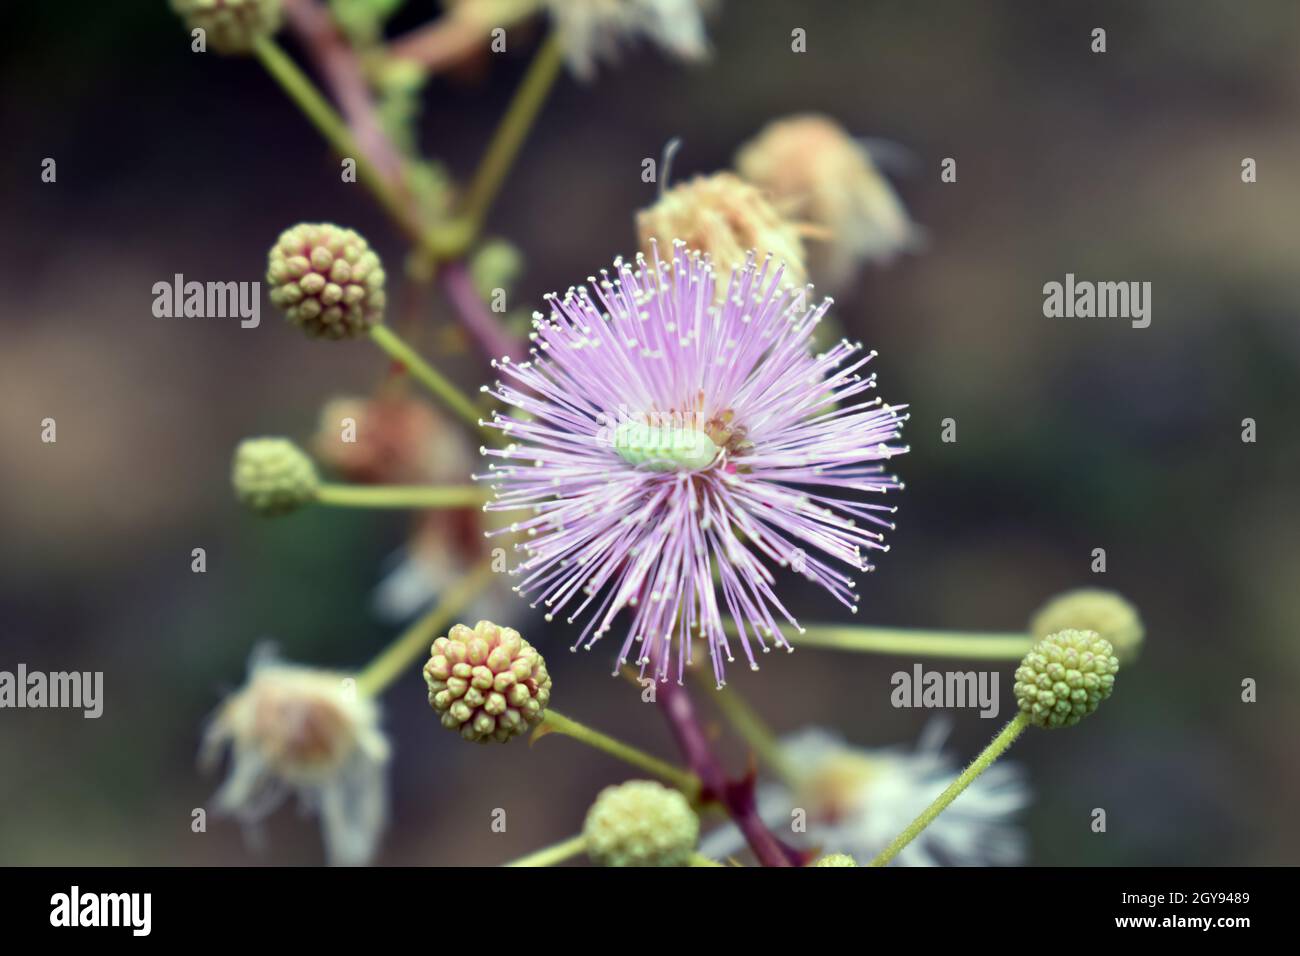 Mimosa pudica, also called sensitive plant, sleepy plant, action plant, touch-me-not, Stock Photo